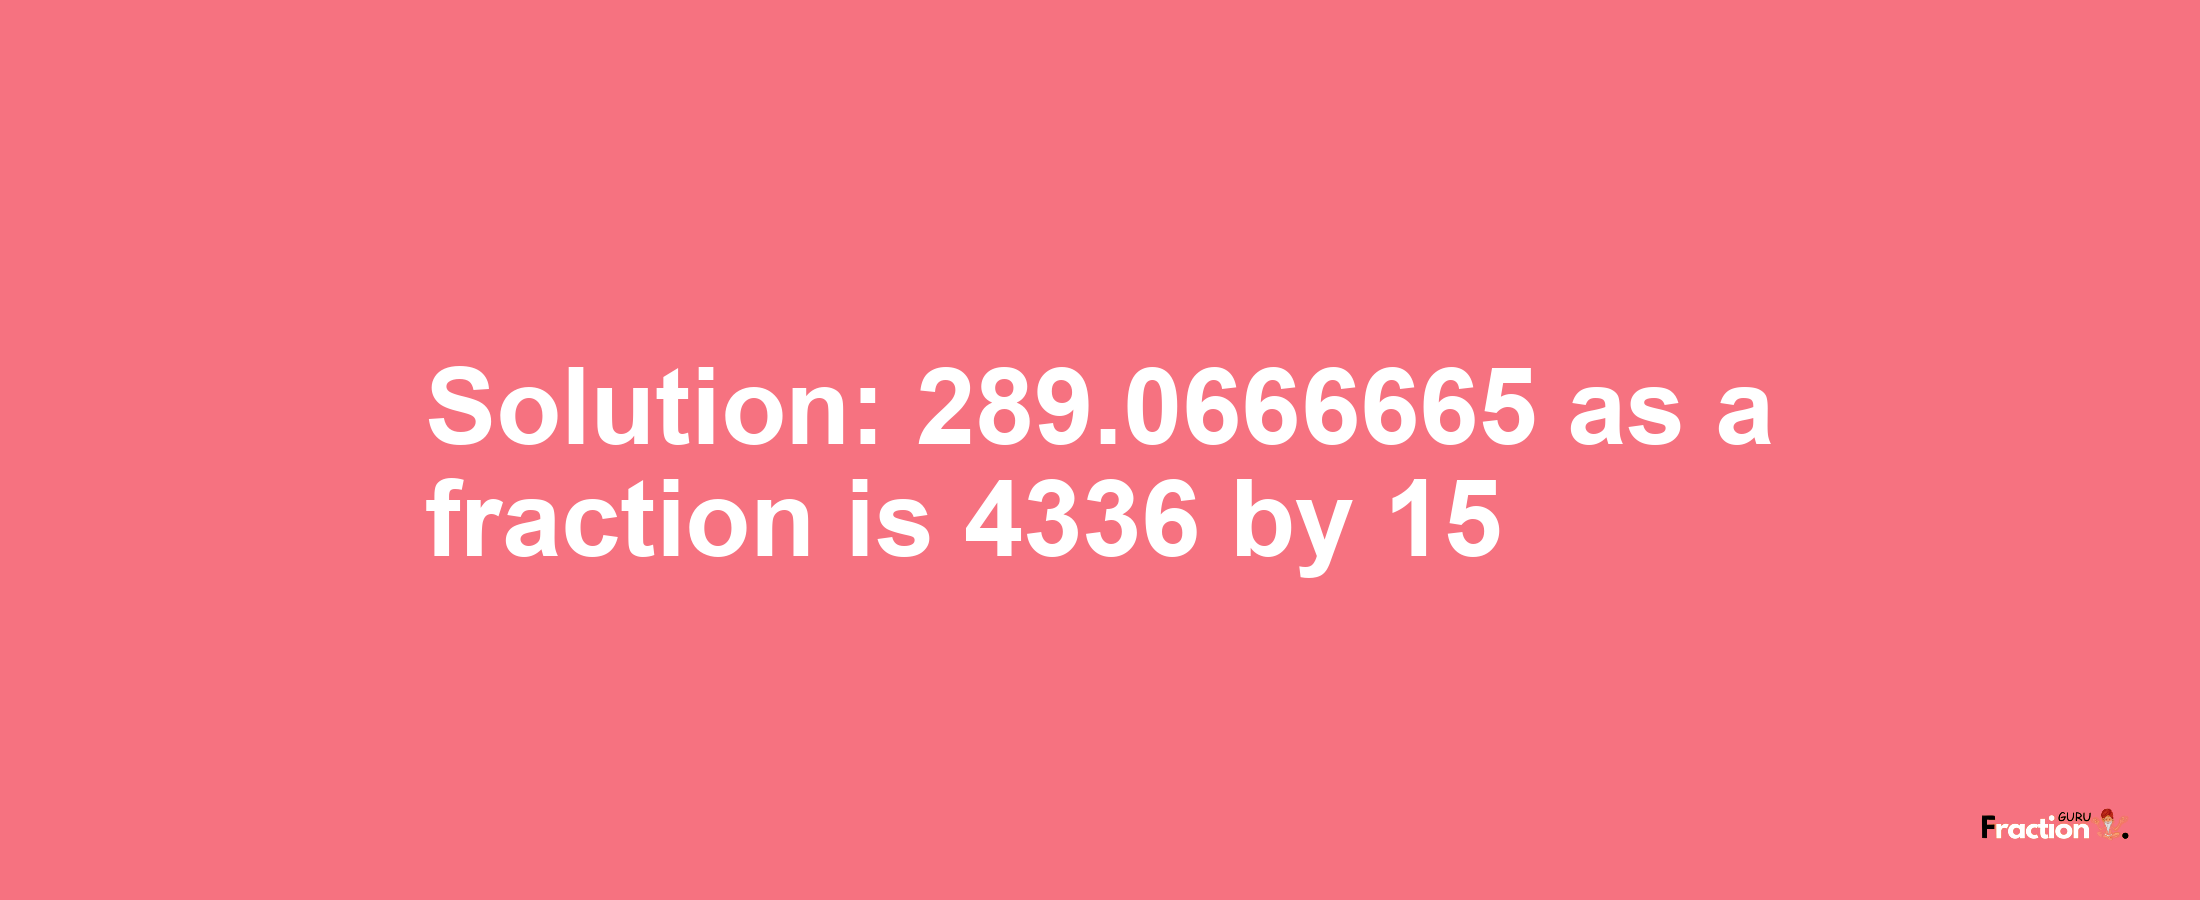 Solution:289.0666665 as a fraction is 4336/15